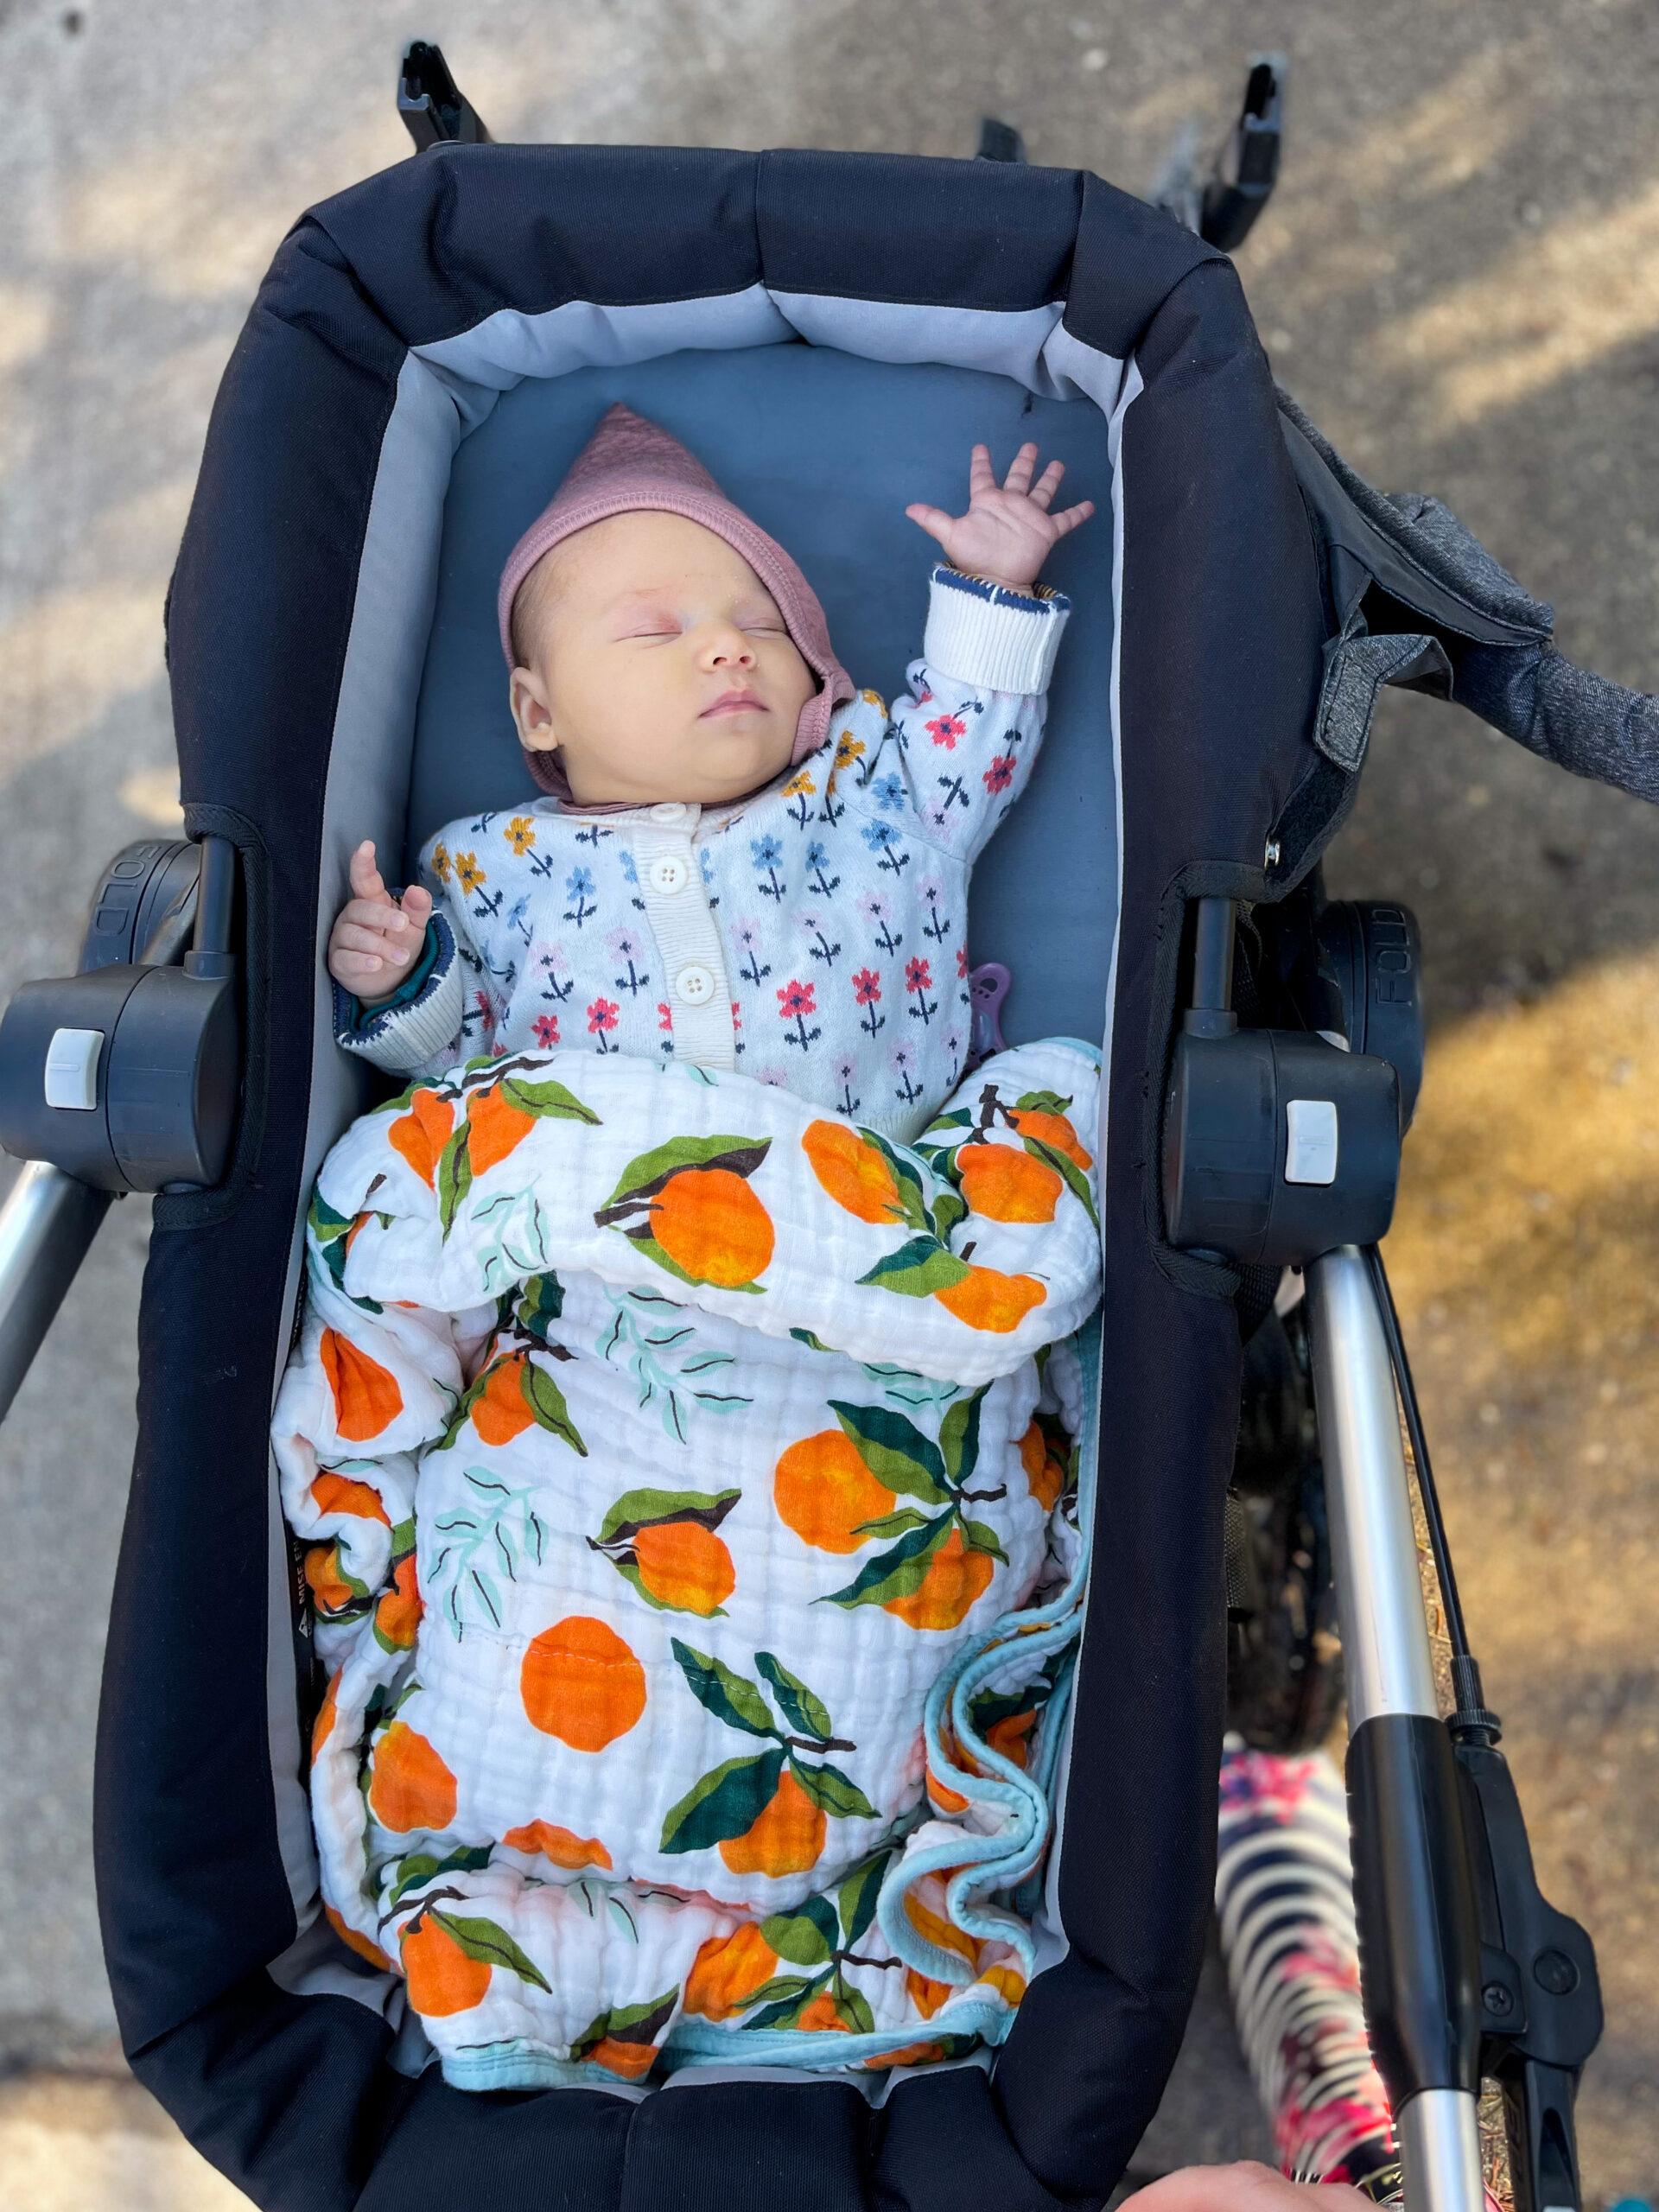 How to Use Stroller for Newborn